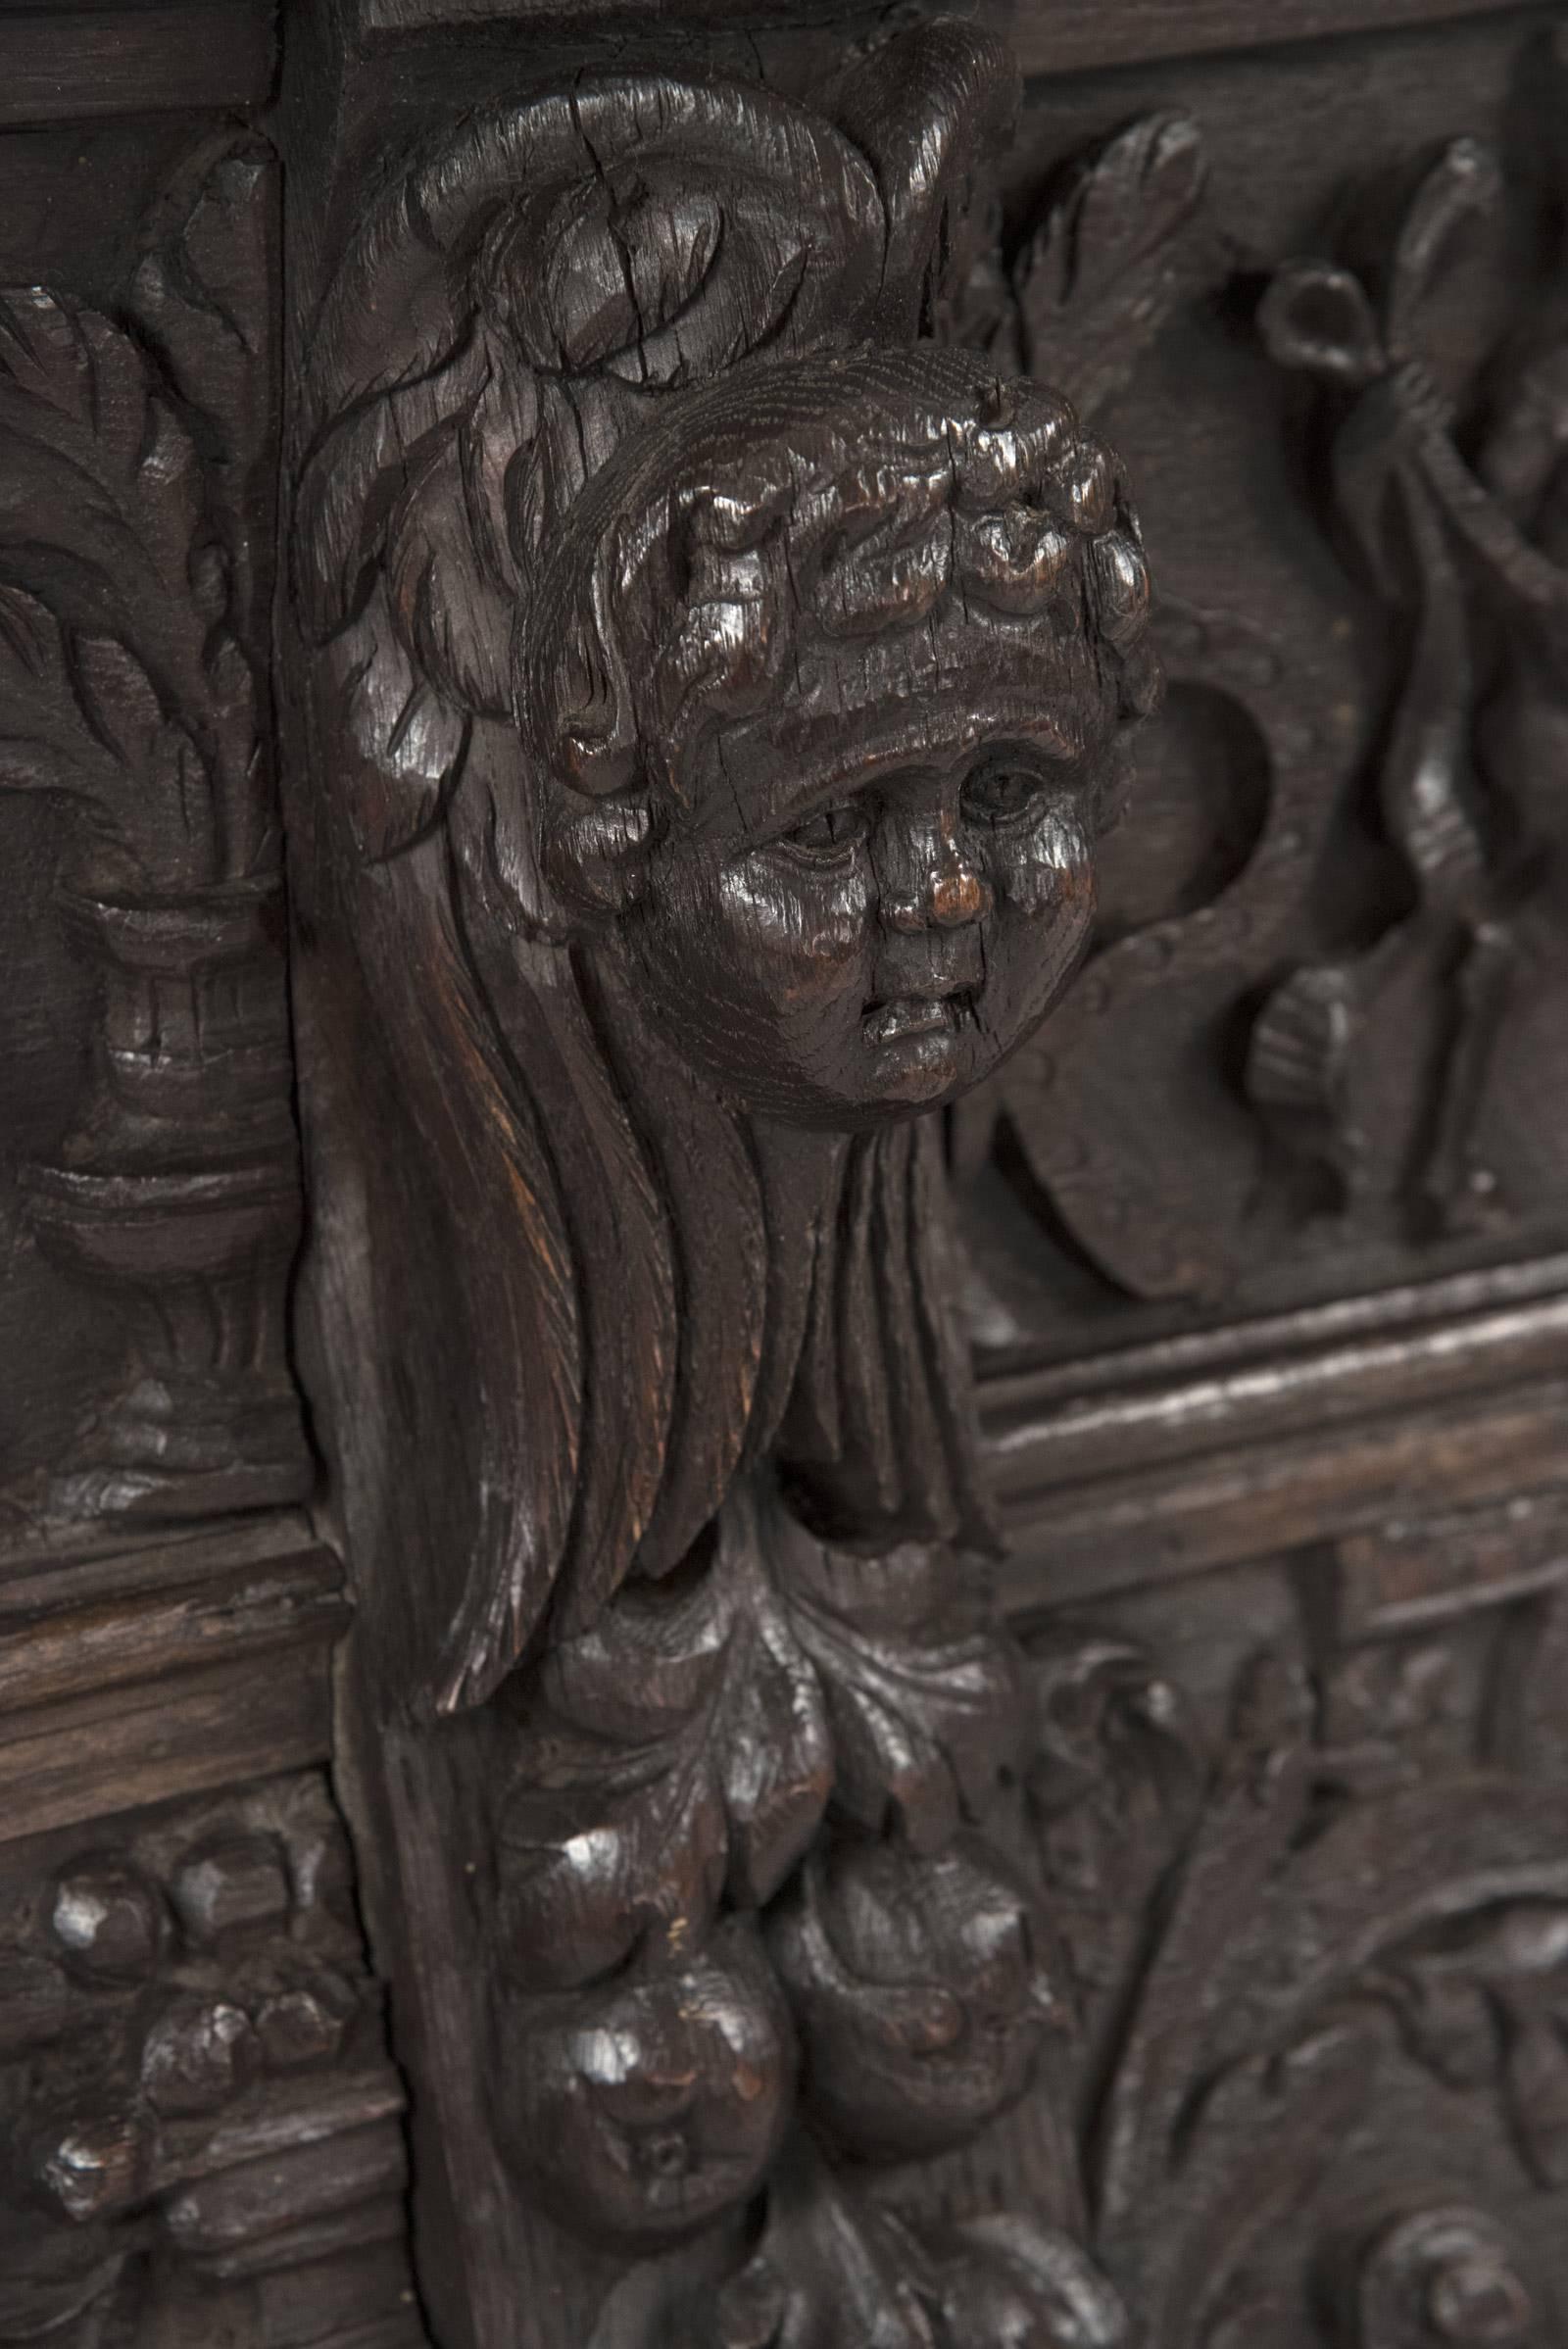 19th Century Carved Oak Shelf with Harvest Imagery